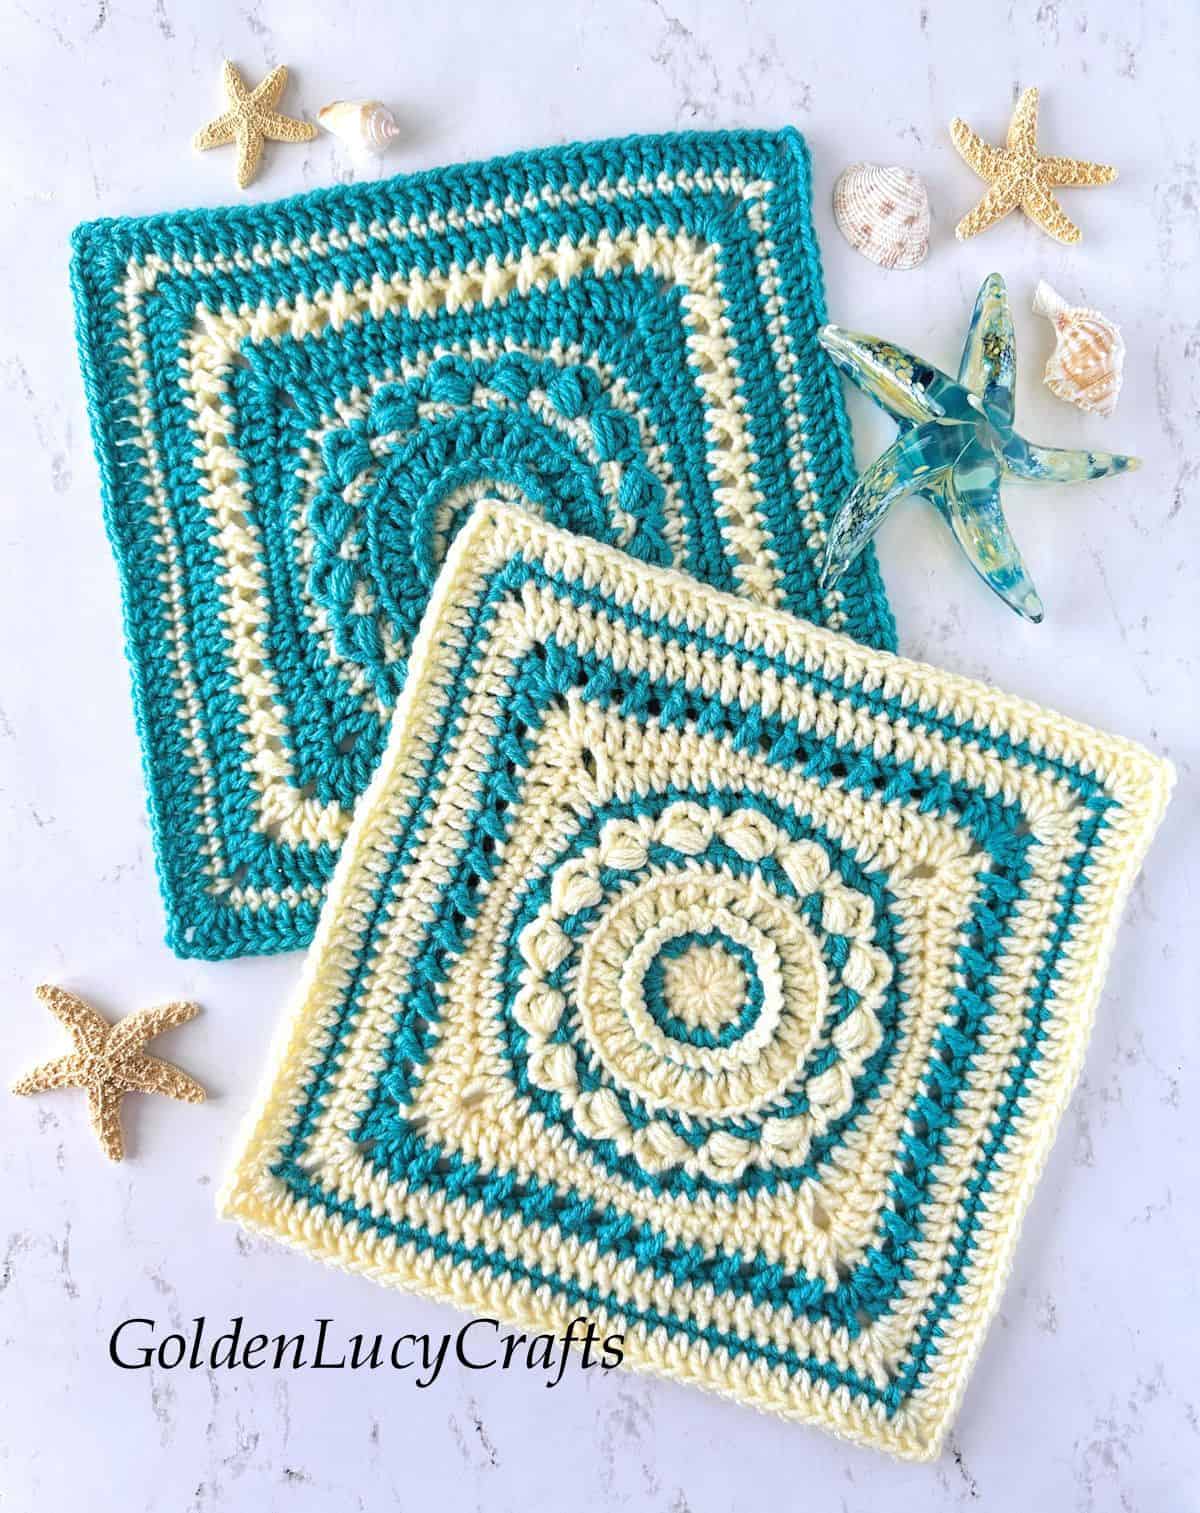 Two crocheted square motifs made in cream and aqua colors.